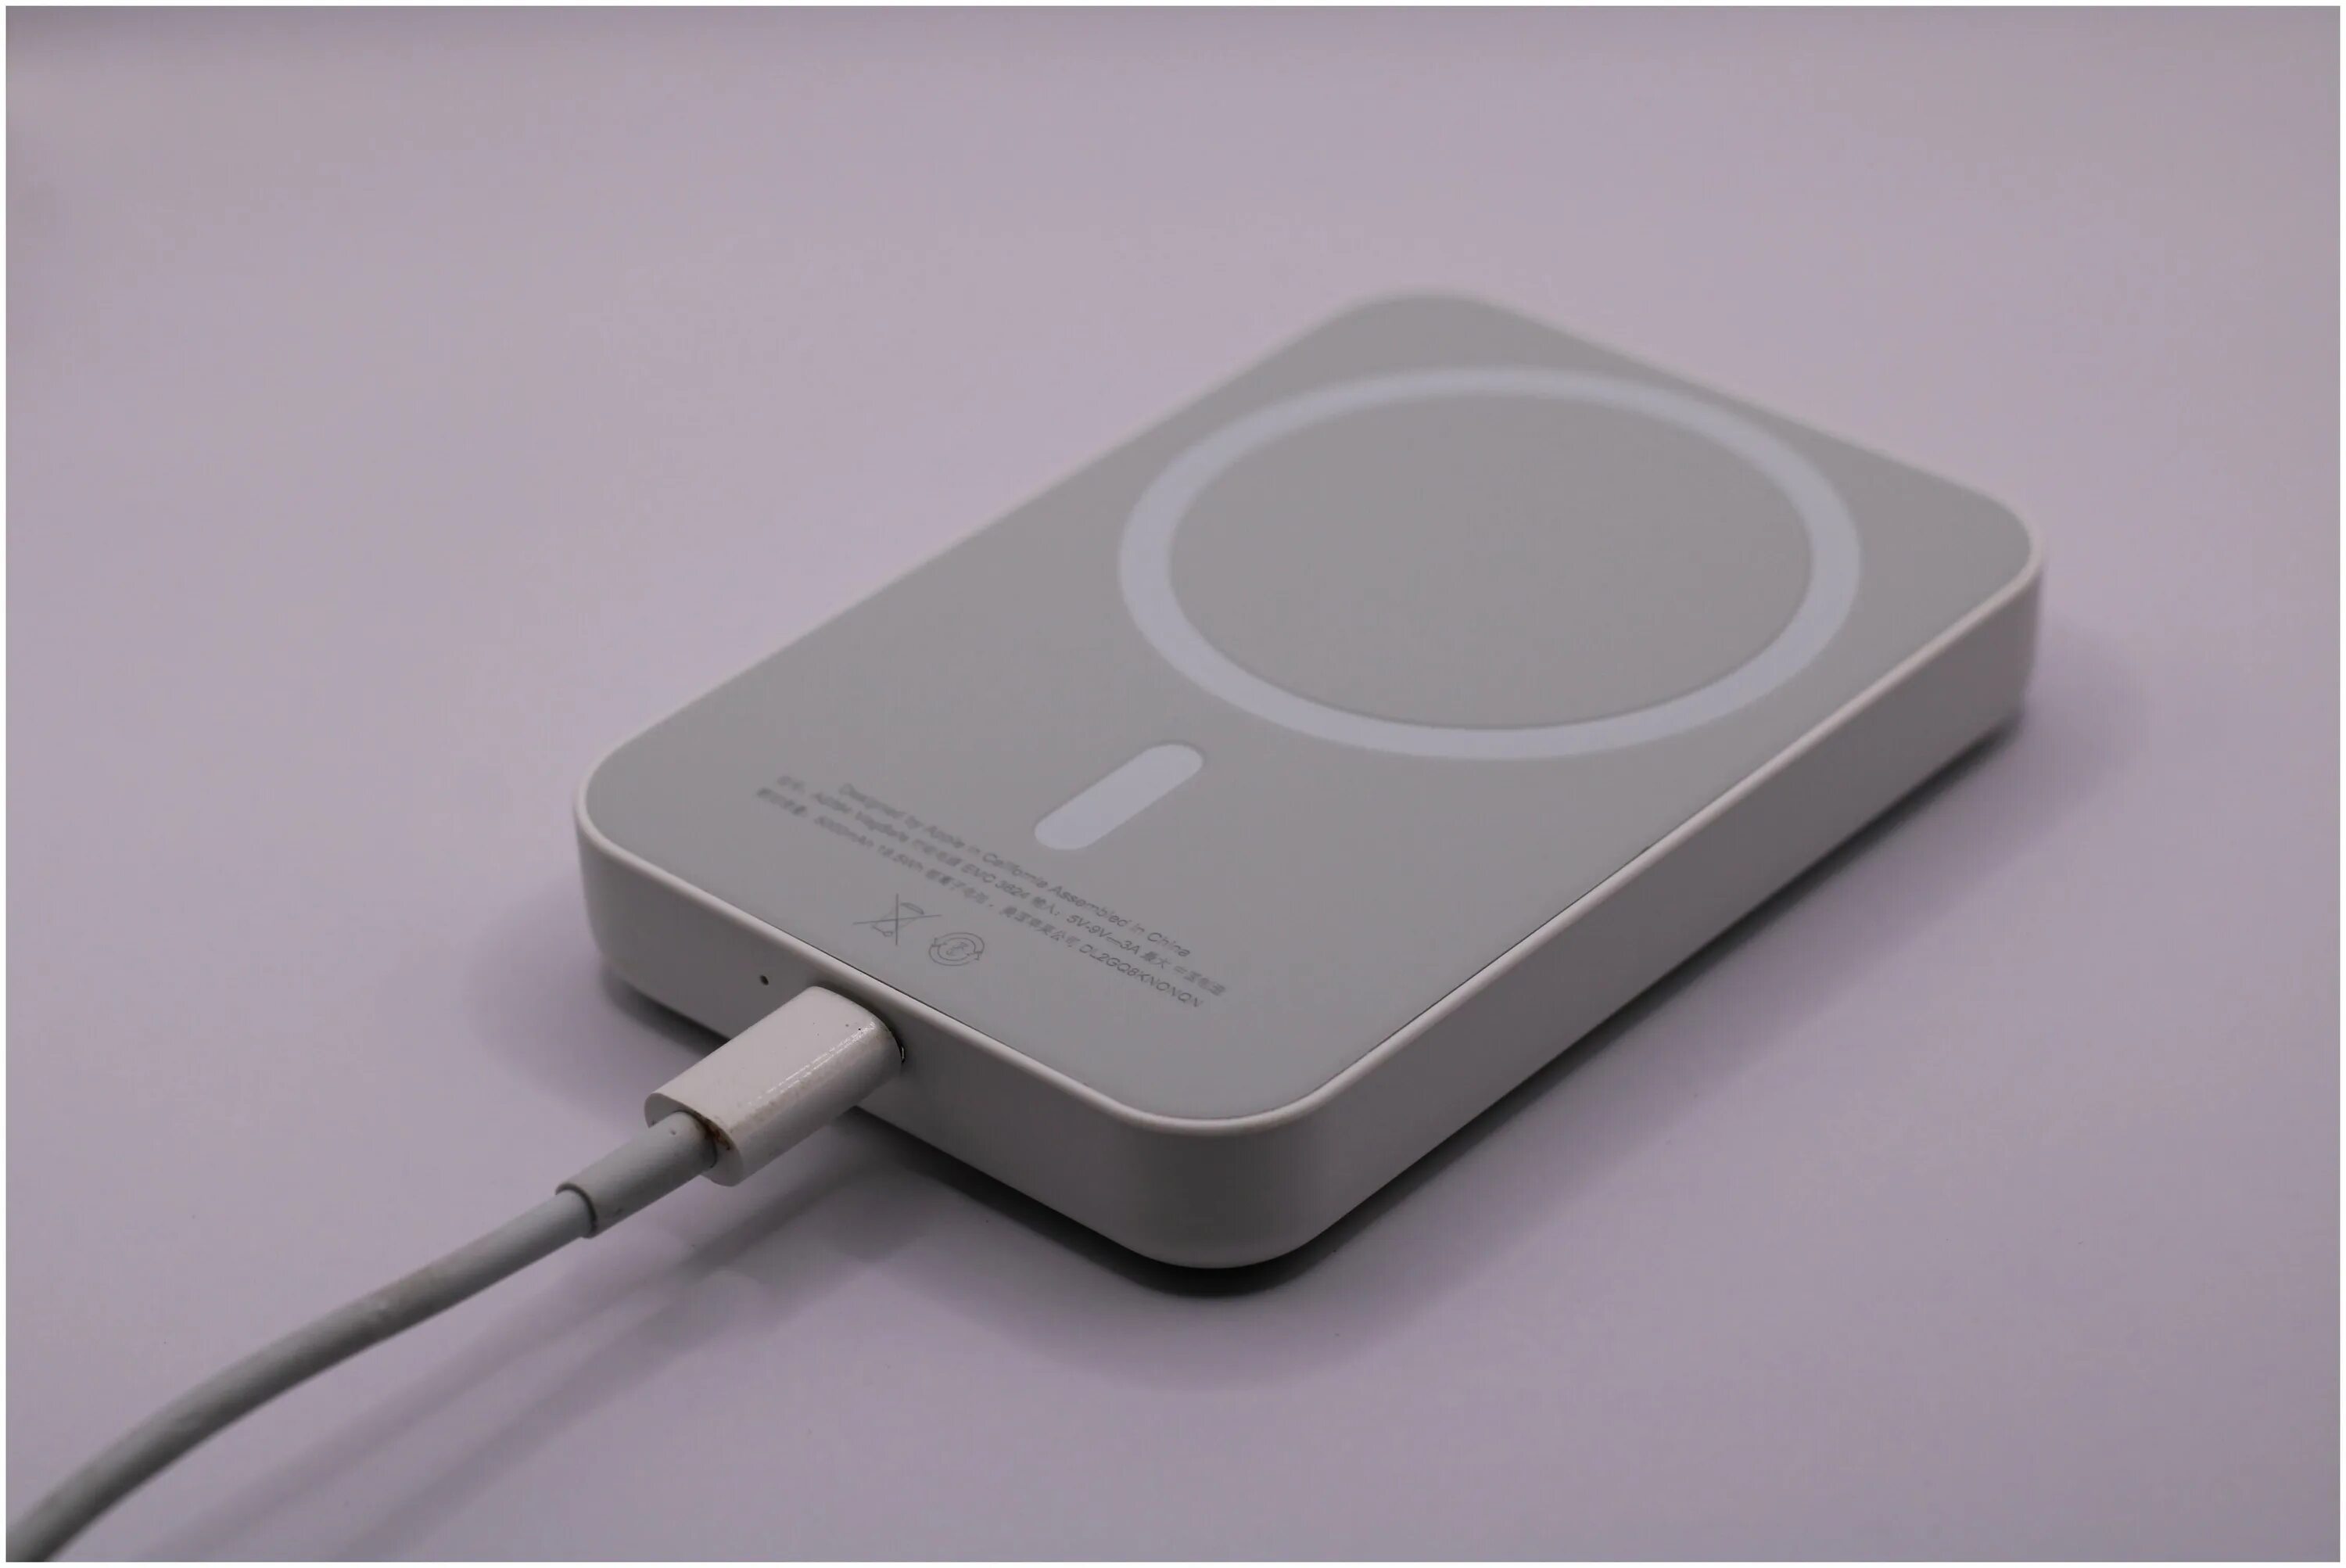 MAGSAFE Battery Pack 5000mah. Apple MAGSAFE Battery Pack. MAGSAFE 5000 Mah. Повербанк Apple MAGSAFE Battery Pack.